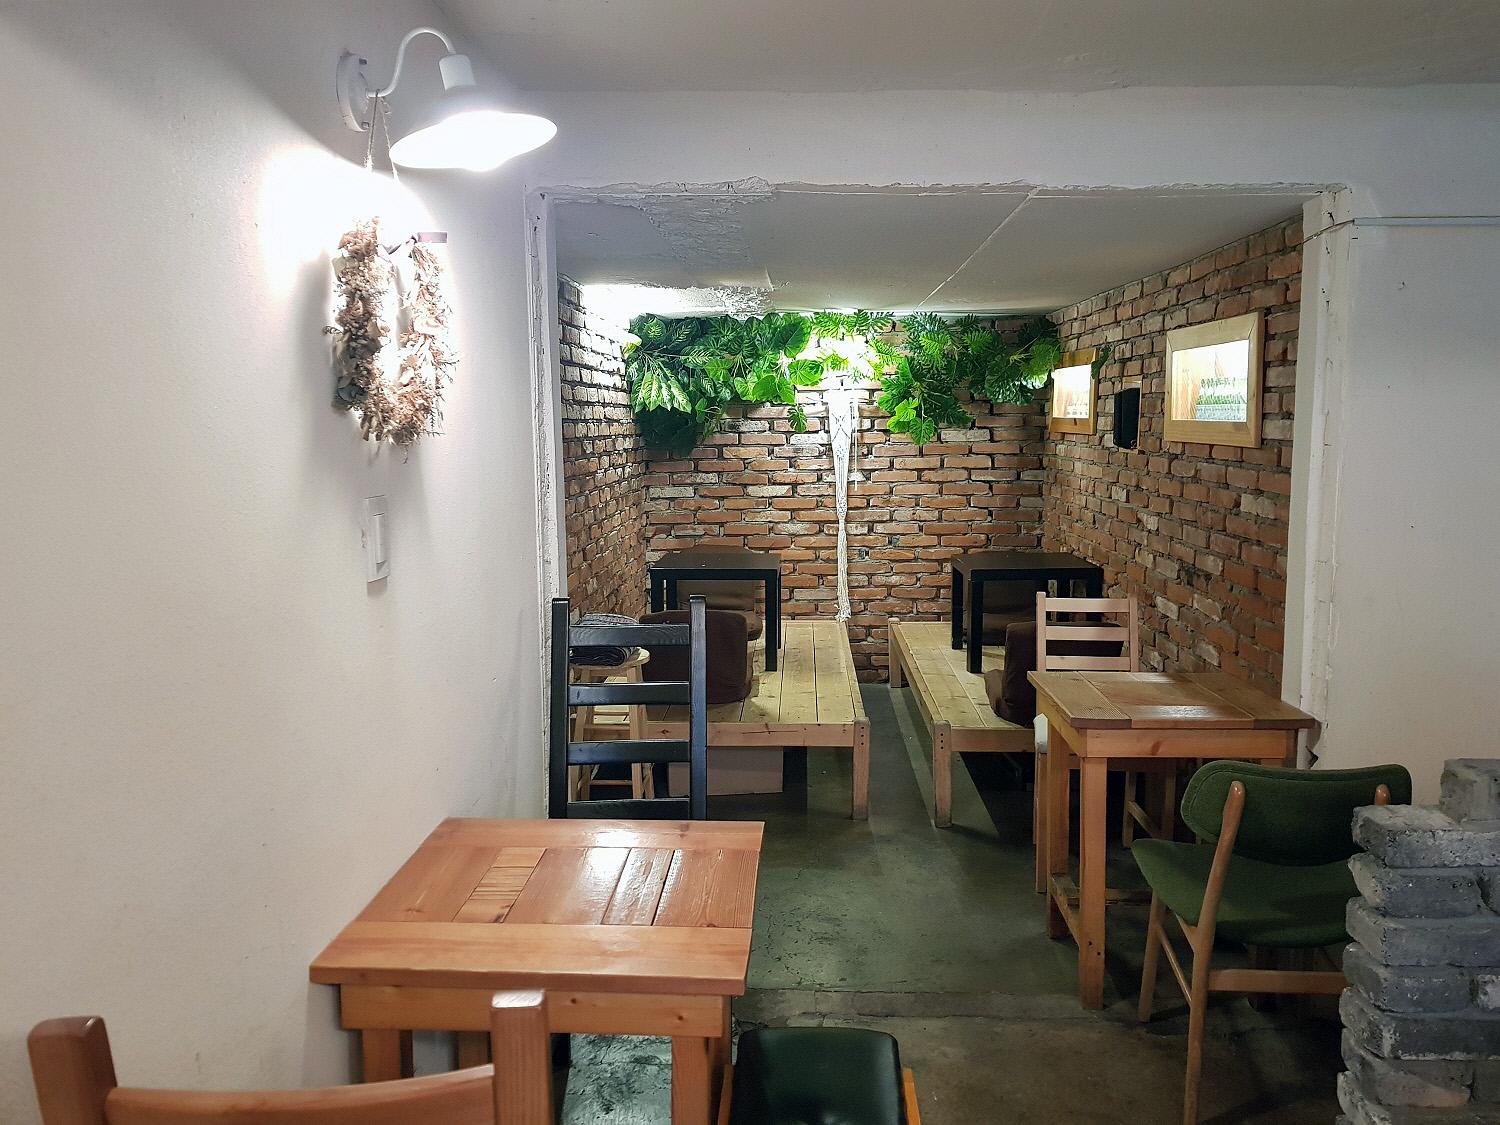 Interior of <Annyeong, Natsun Sarang> restaurant in Seoul with wooden furniture, houseplants and flooring.